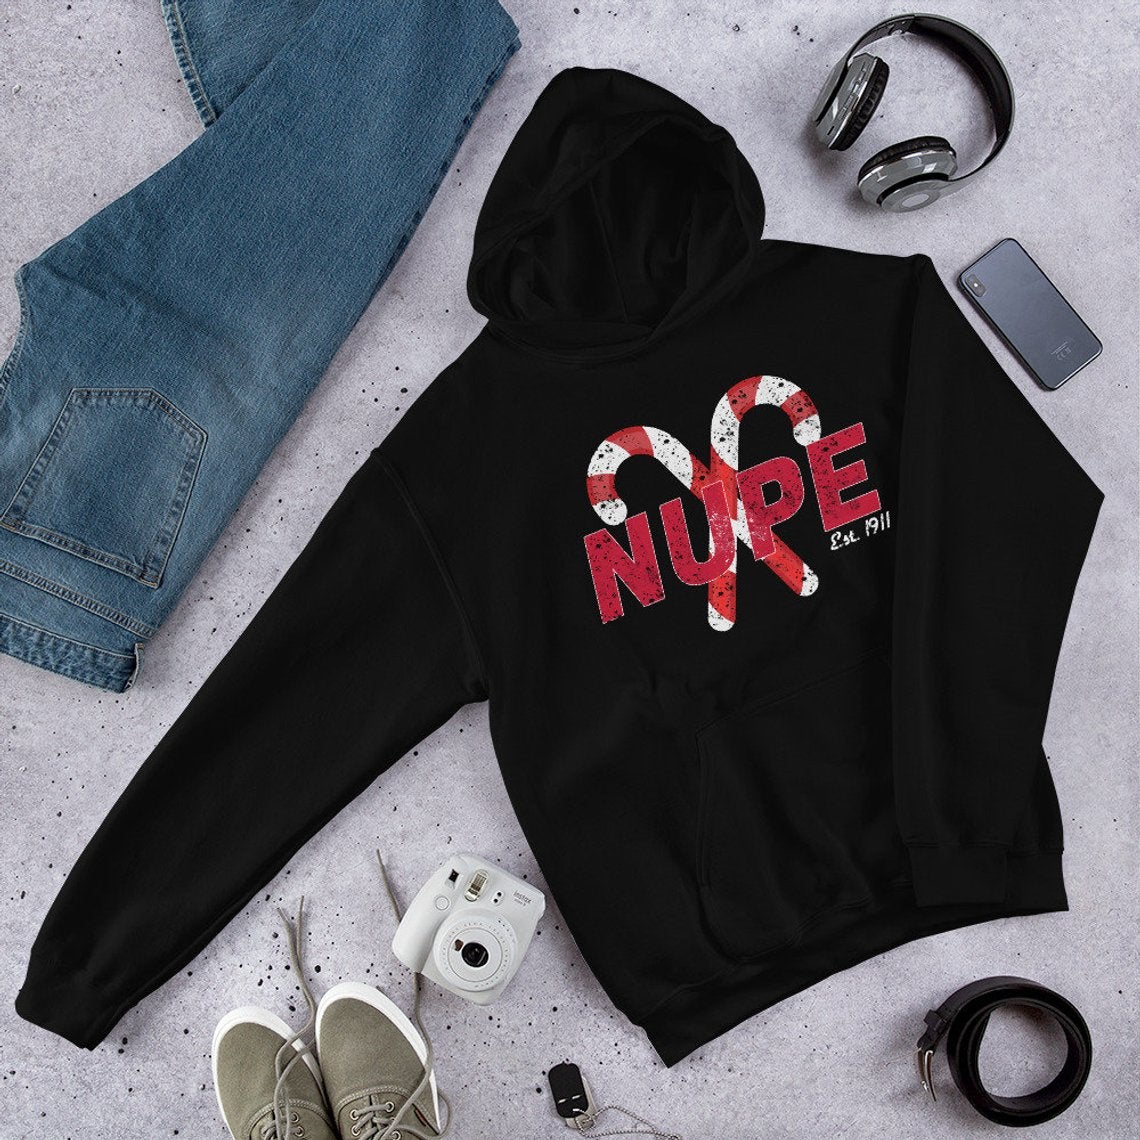 8 Gifts to Make Your Kappa Man Shimmy on Valentine’s Day